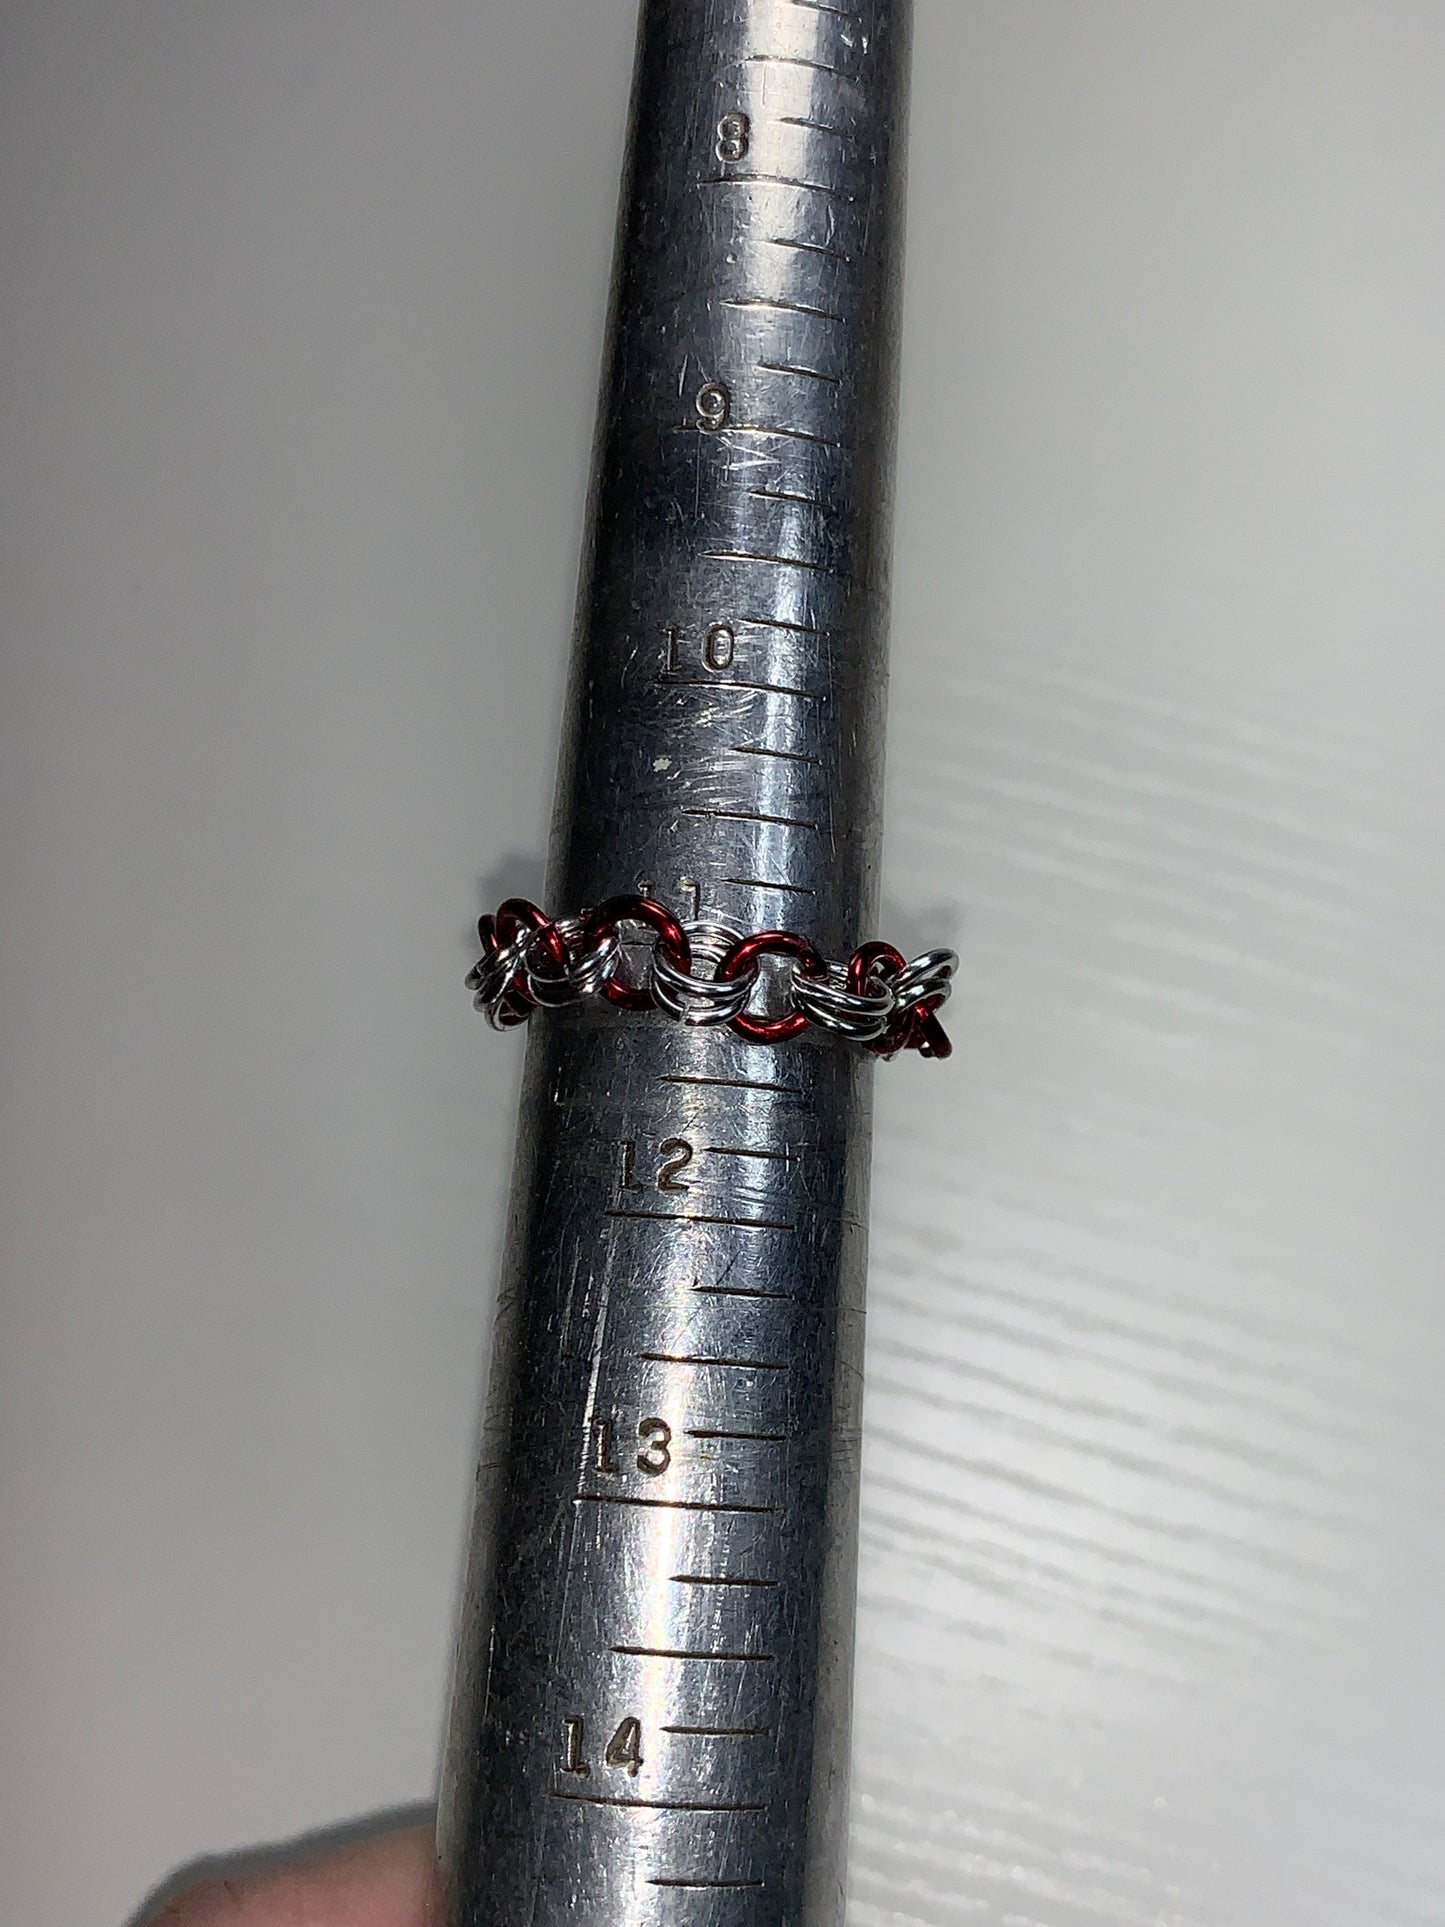 Red and Silver Chainmail ring, Size 11